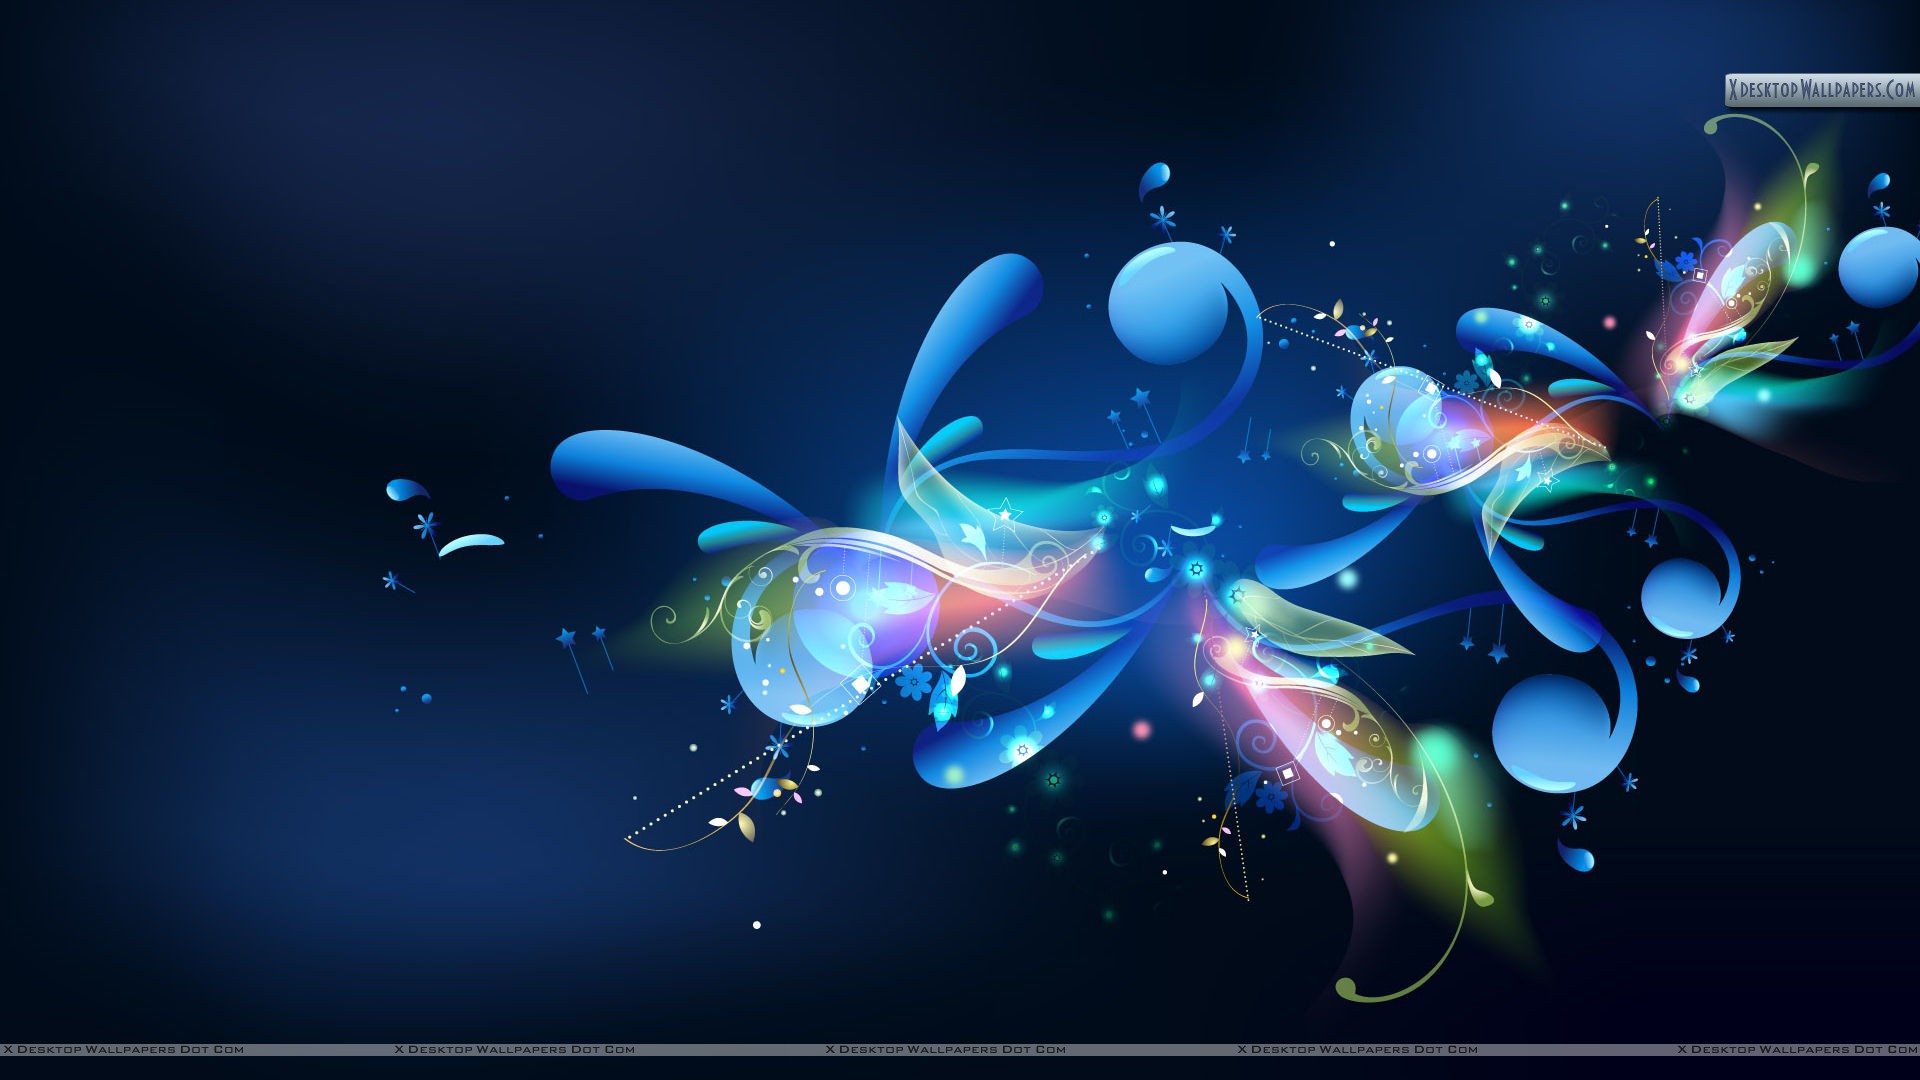 Cool Looking Blue Abstract Wallpaper 1920x1080